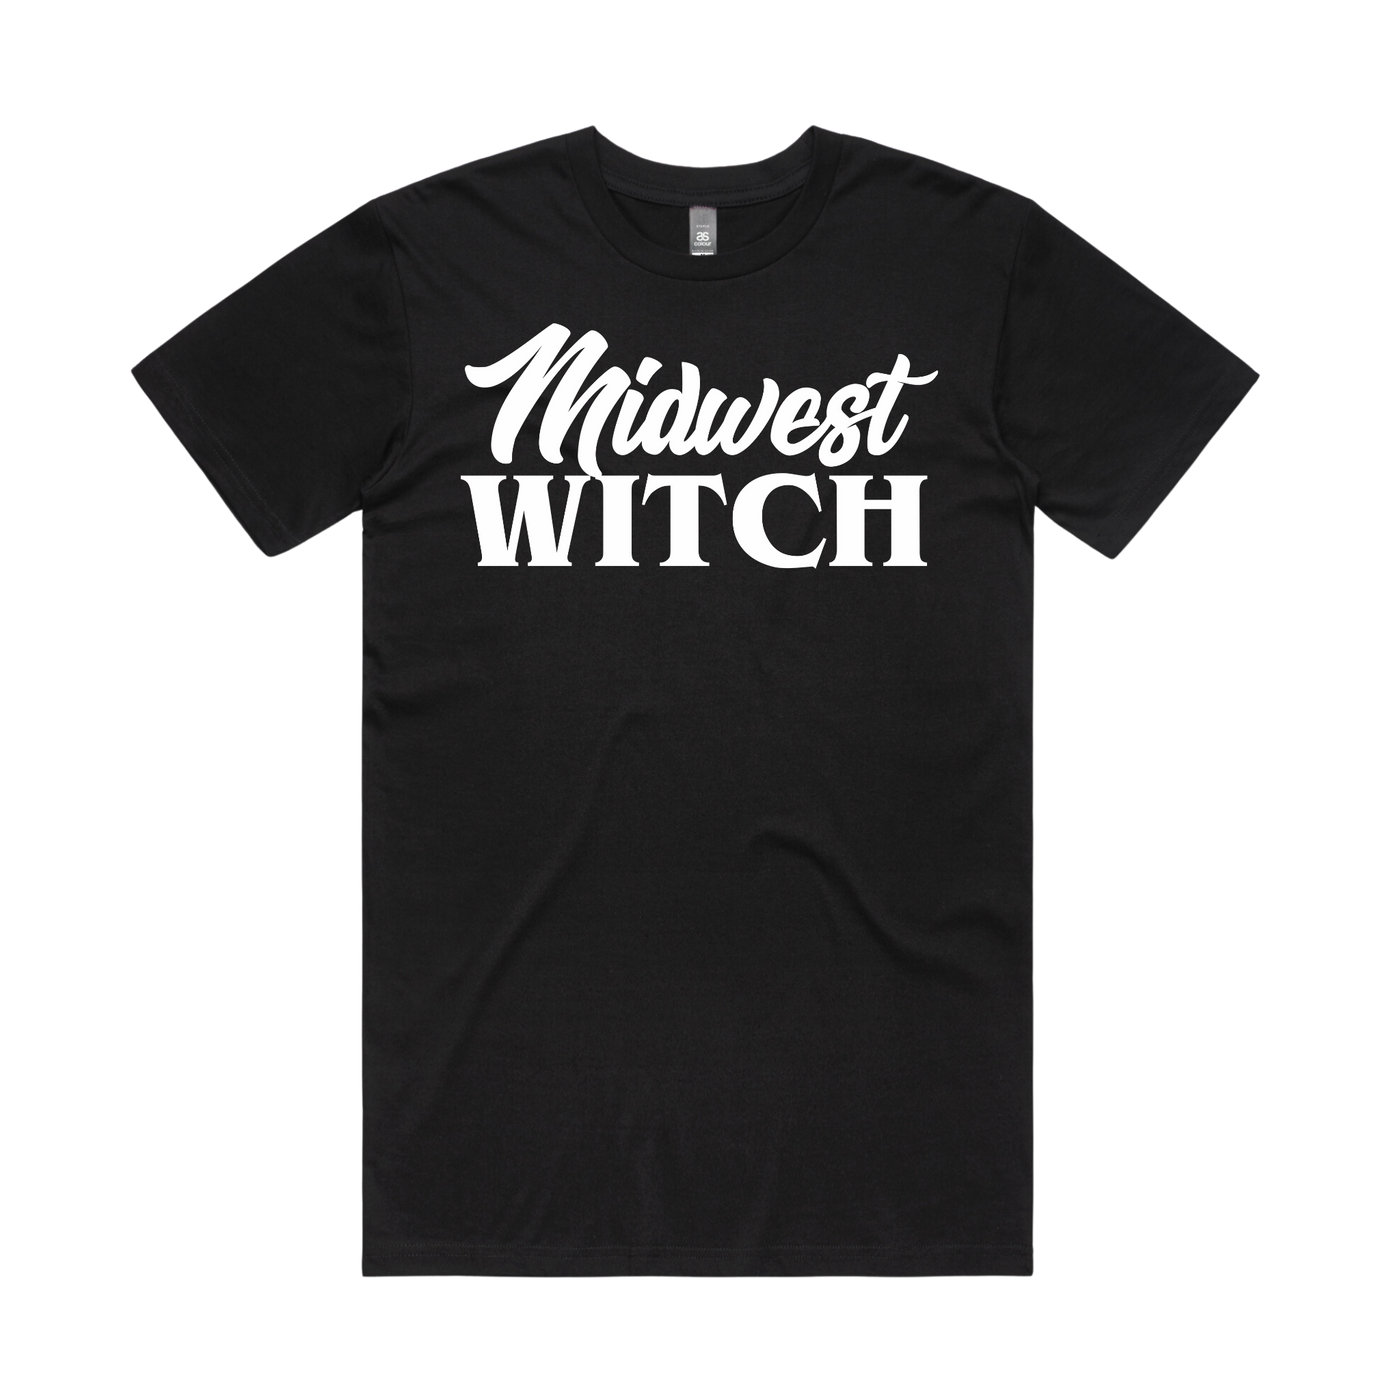 Midwest Witch Tee